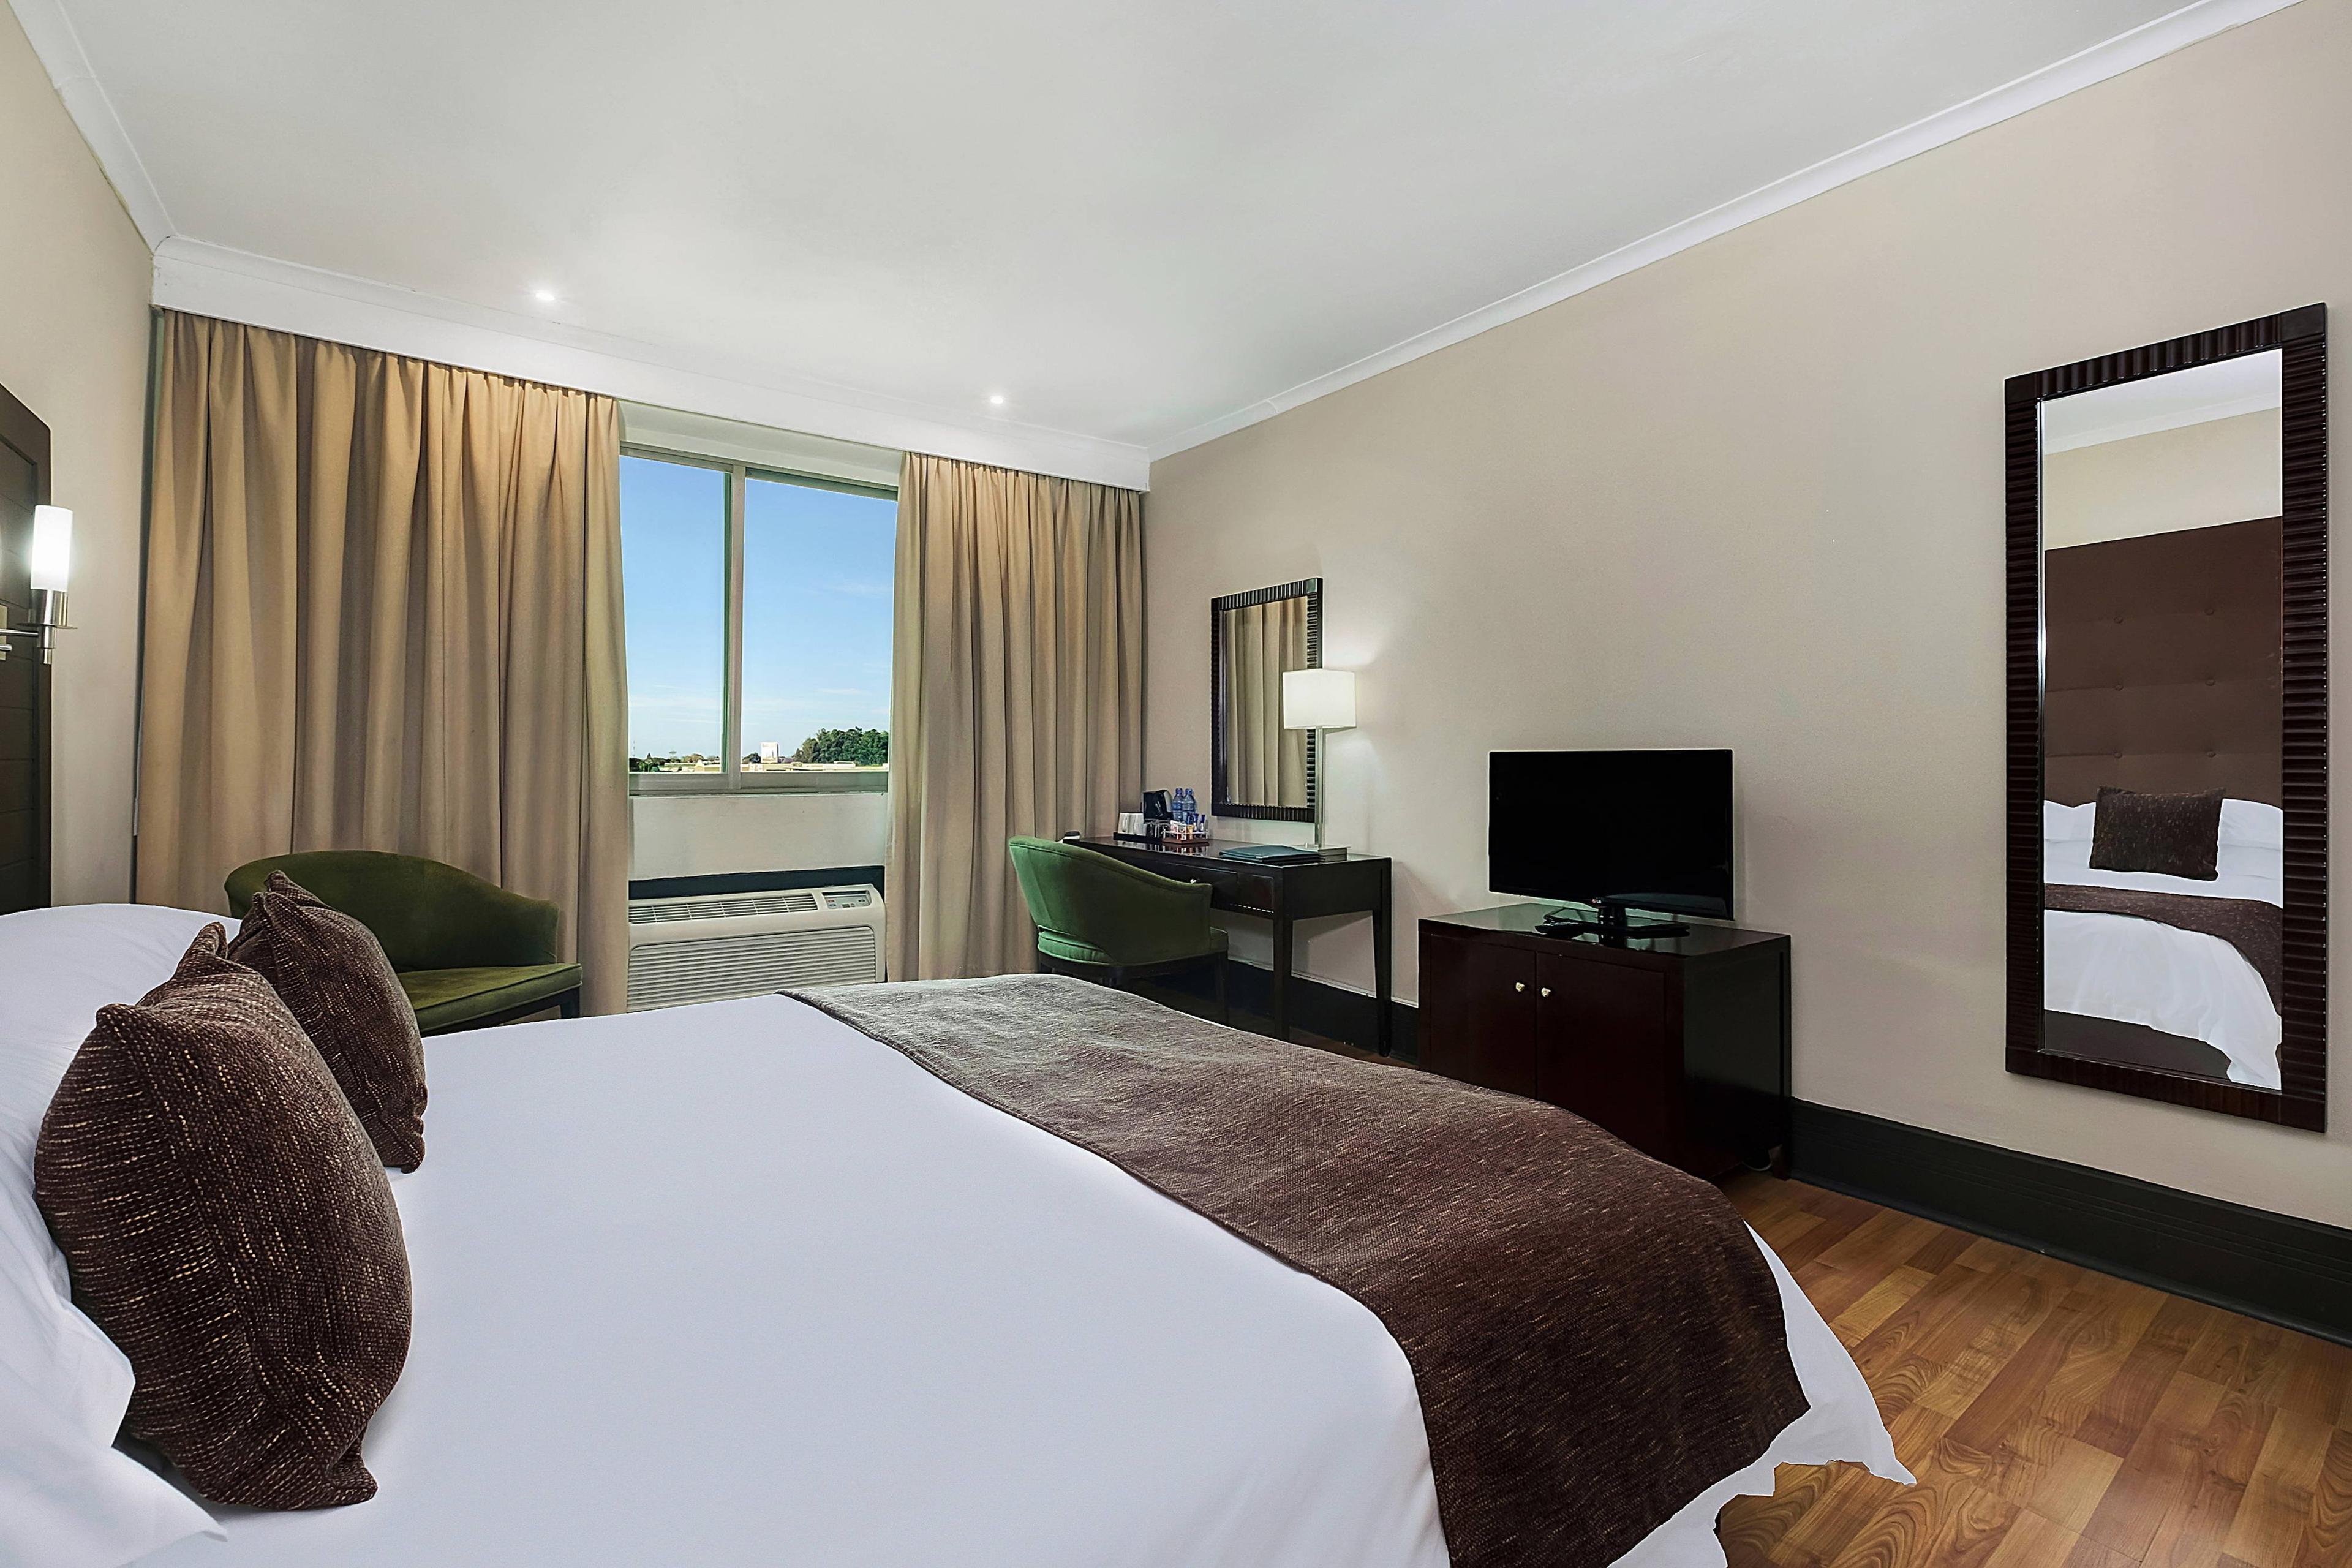 Our 84 Standard double king rooms boast luxury and convenience. All rooms feature beautiful wooden floors and furniture and energy efficient air conditioners.